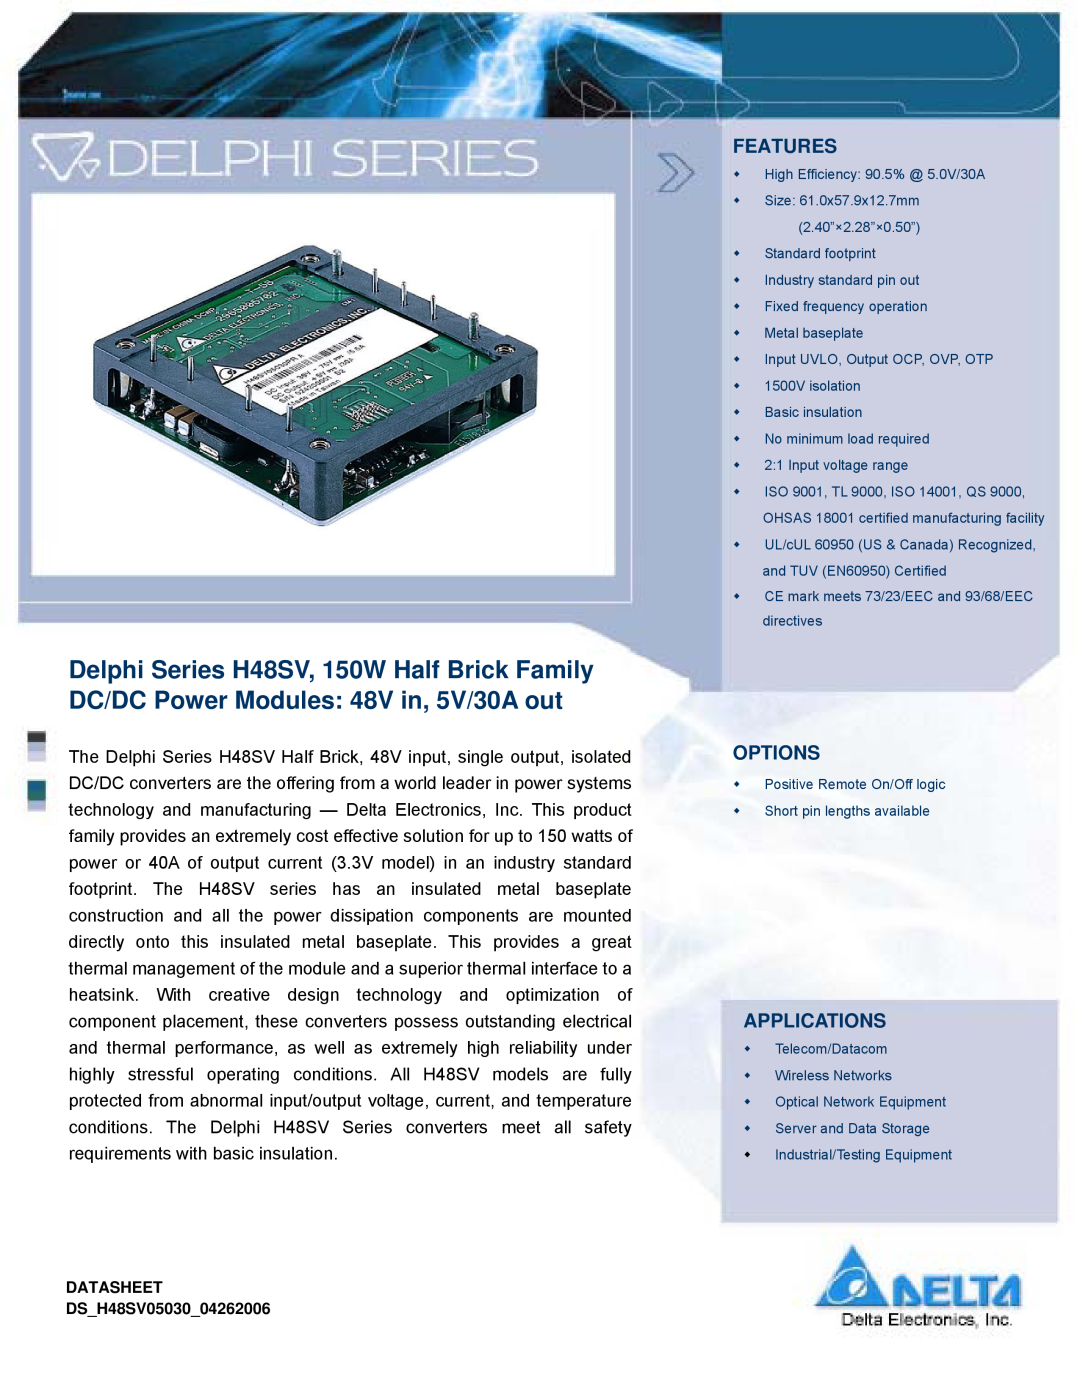 Delta Electronics manual Features, Options, Applications, DATASHEET DSH48SV0503004262006 